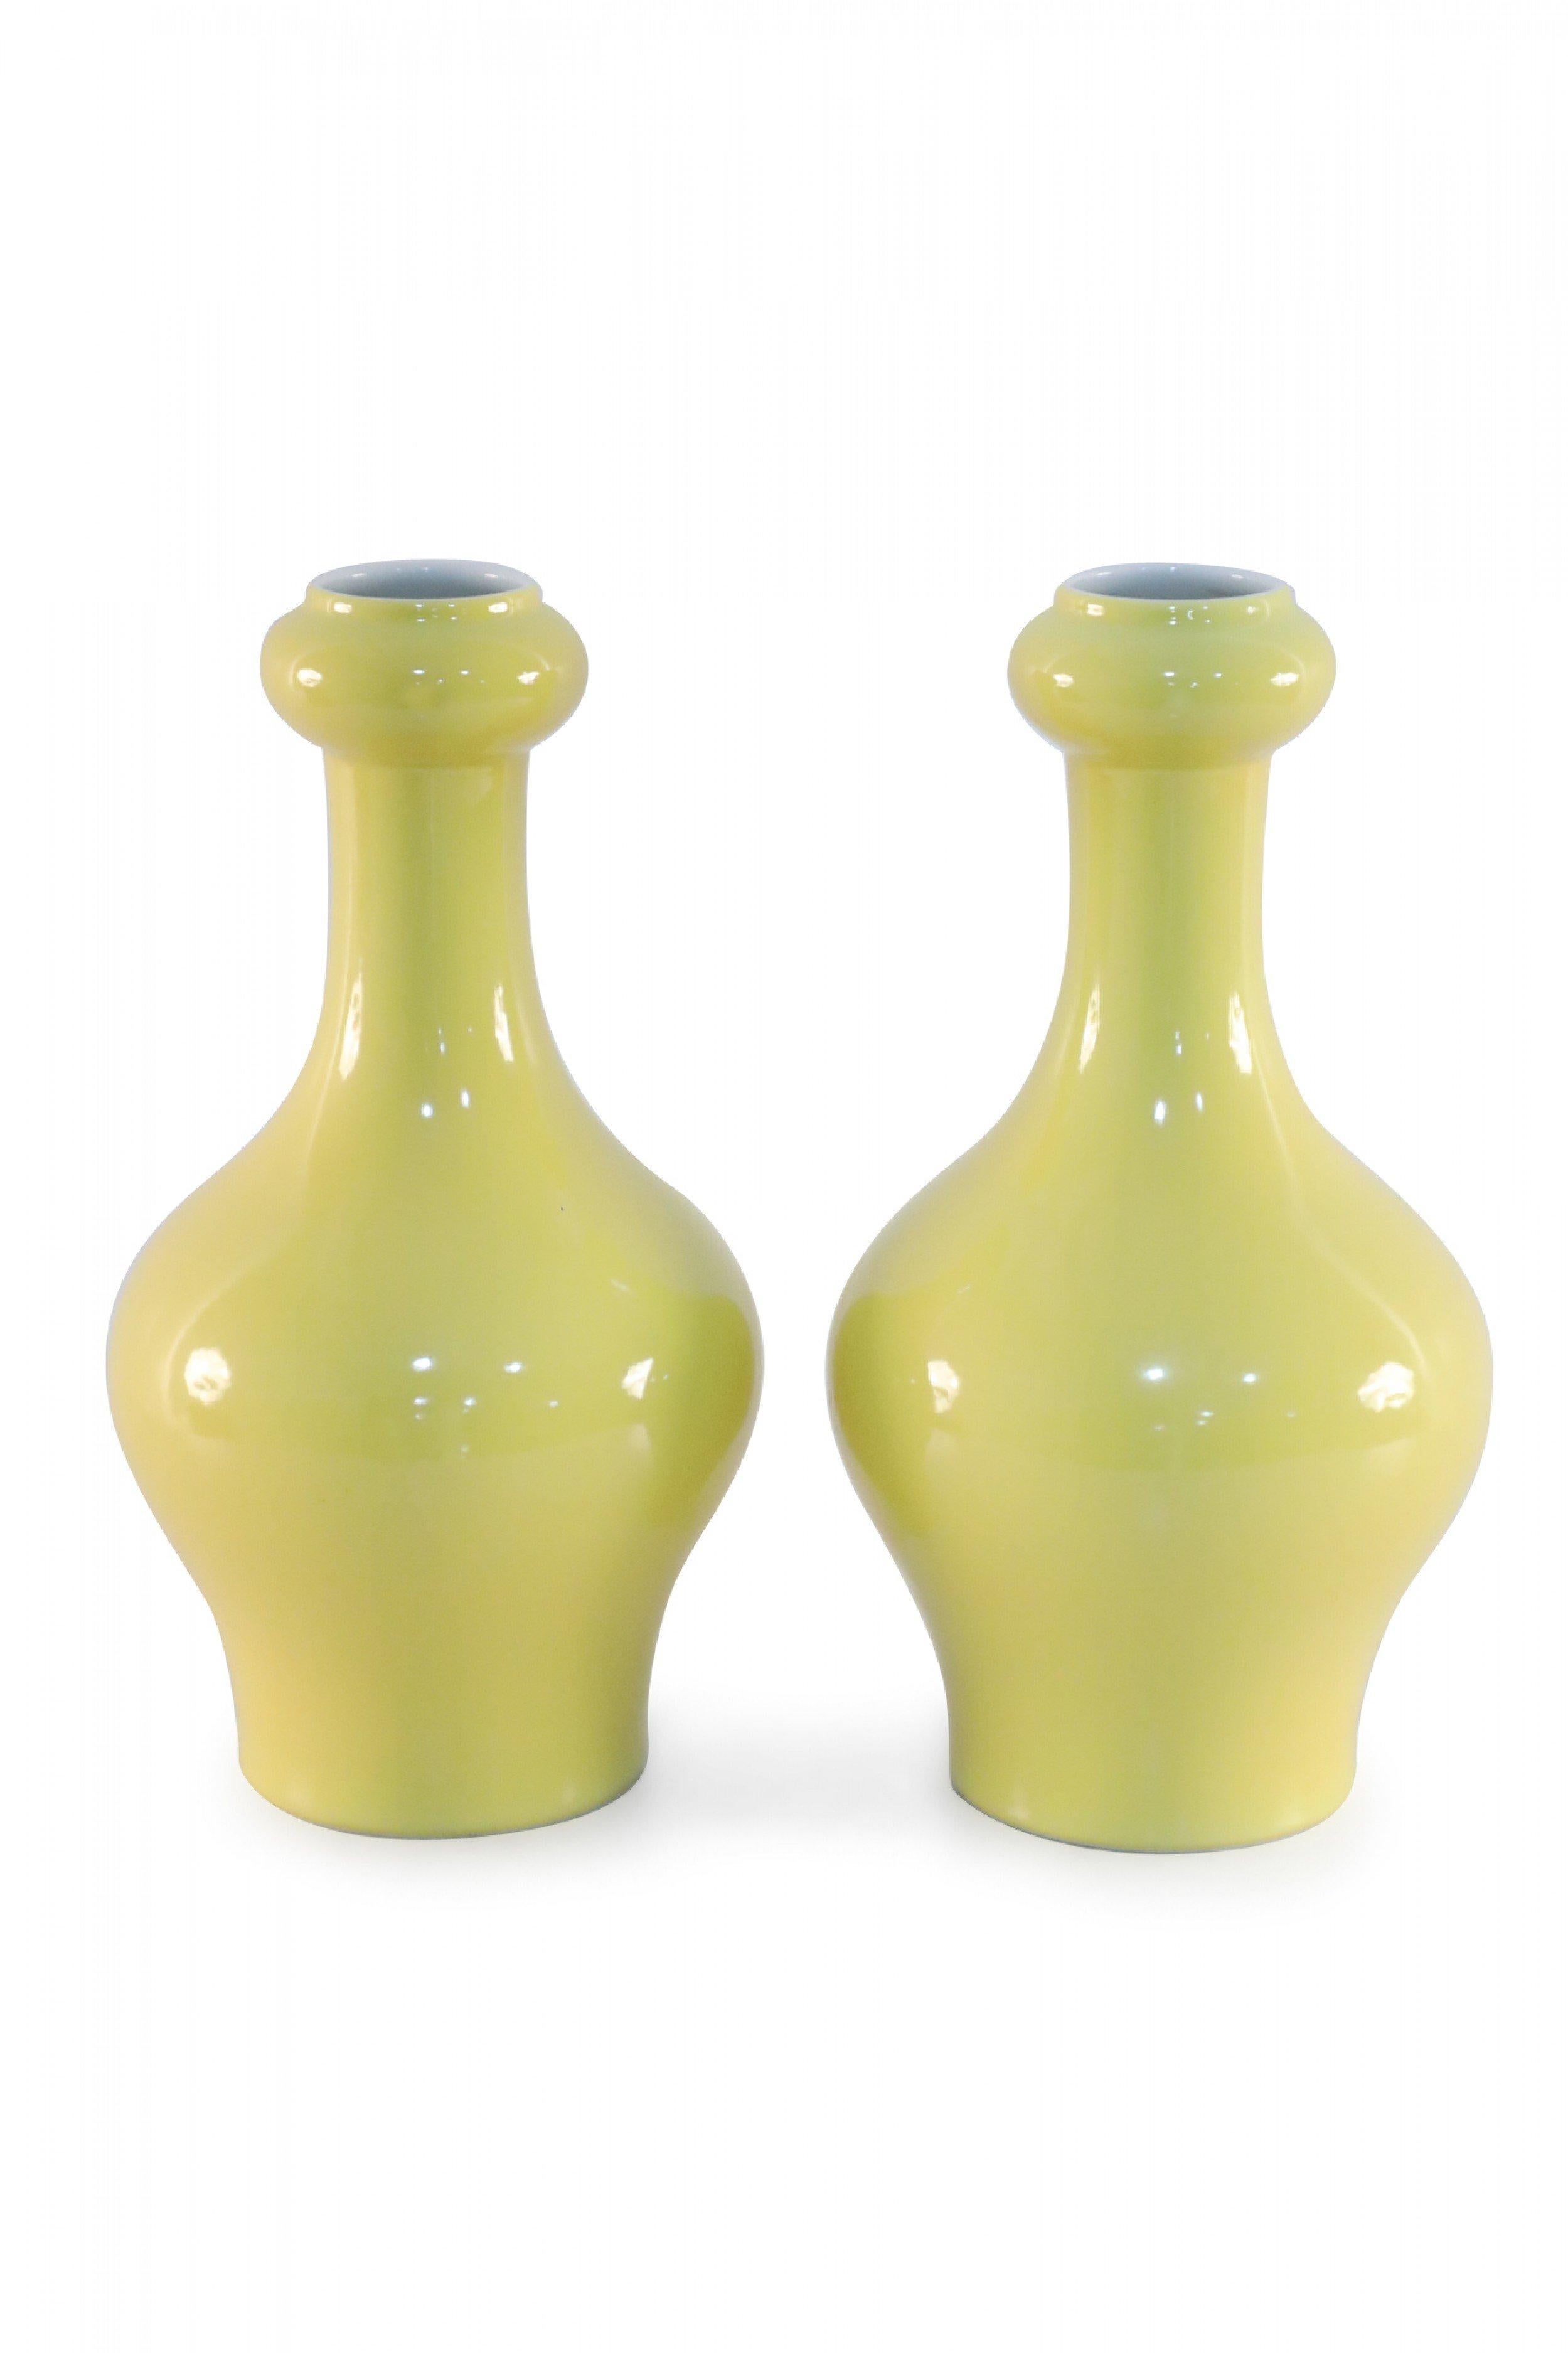 Pair of antique Chinese (late 19th century) yellow porcelain vases with garlic-mouth forms (date mark on bottom, see photos) (priced as pair).
  